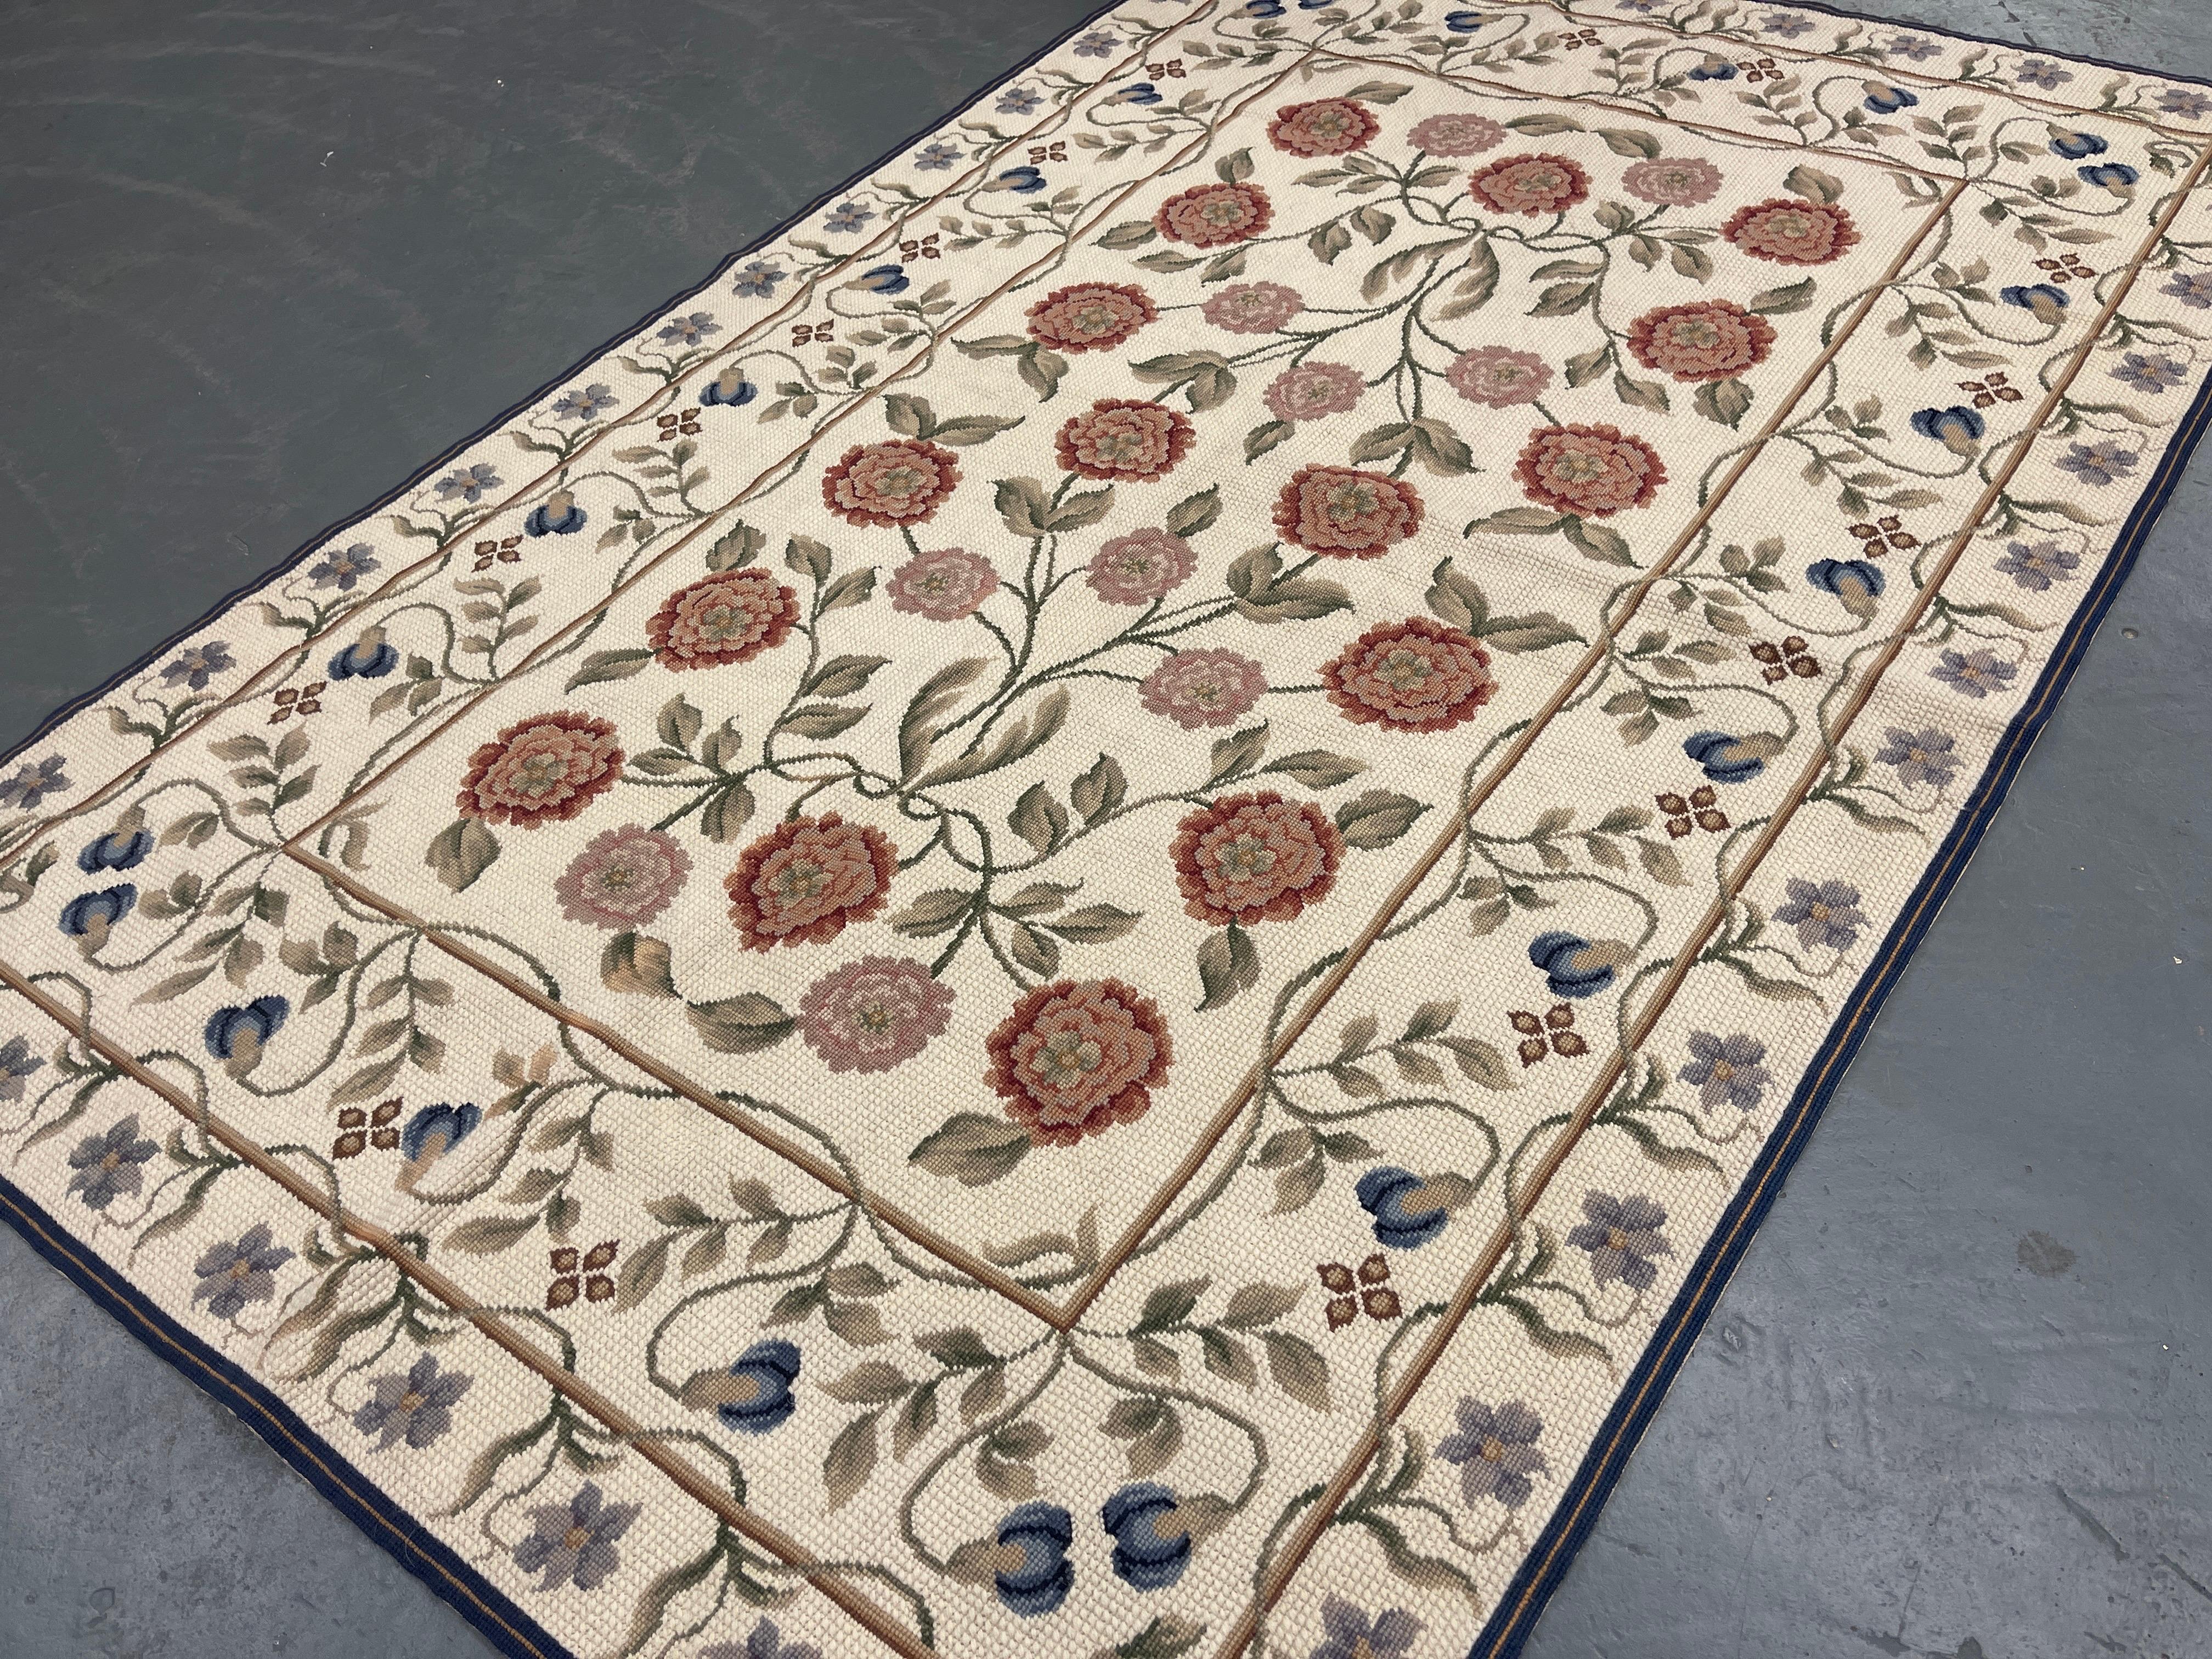 This fantastic area floral rug has been handwoven with a beautiful all-over floral design woven on a cream ivory background with cream green and pink accents. This elegant piece's colour and design make it the perfect accent rug.
This rug style is